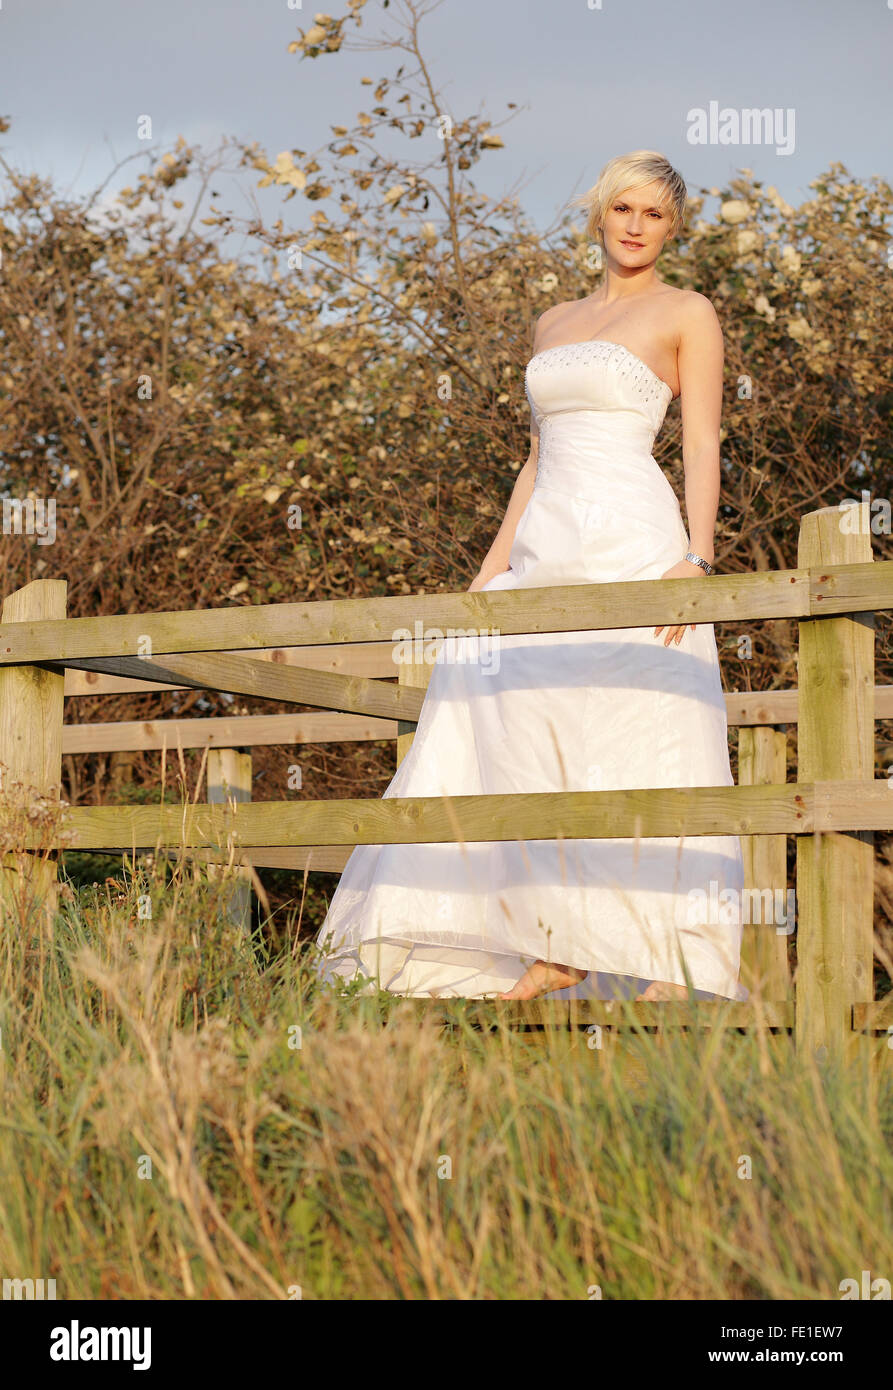 Beautiful young bride on a fashion shoot during the golden hour of Dusk. Stock Photo